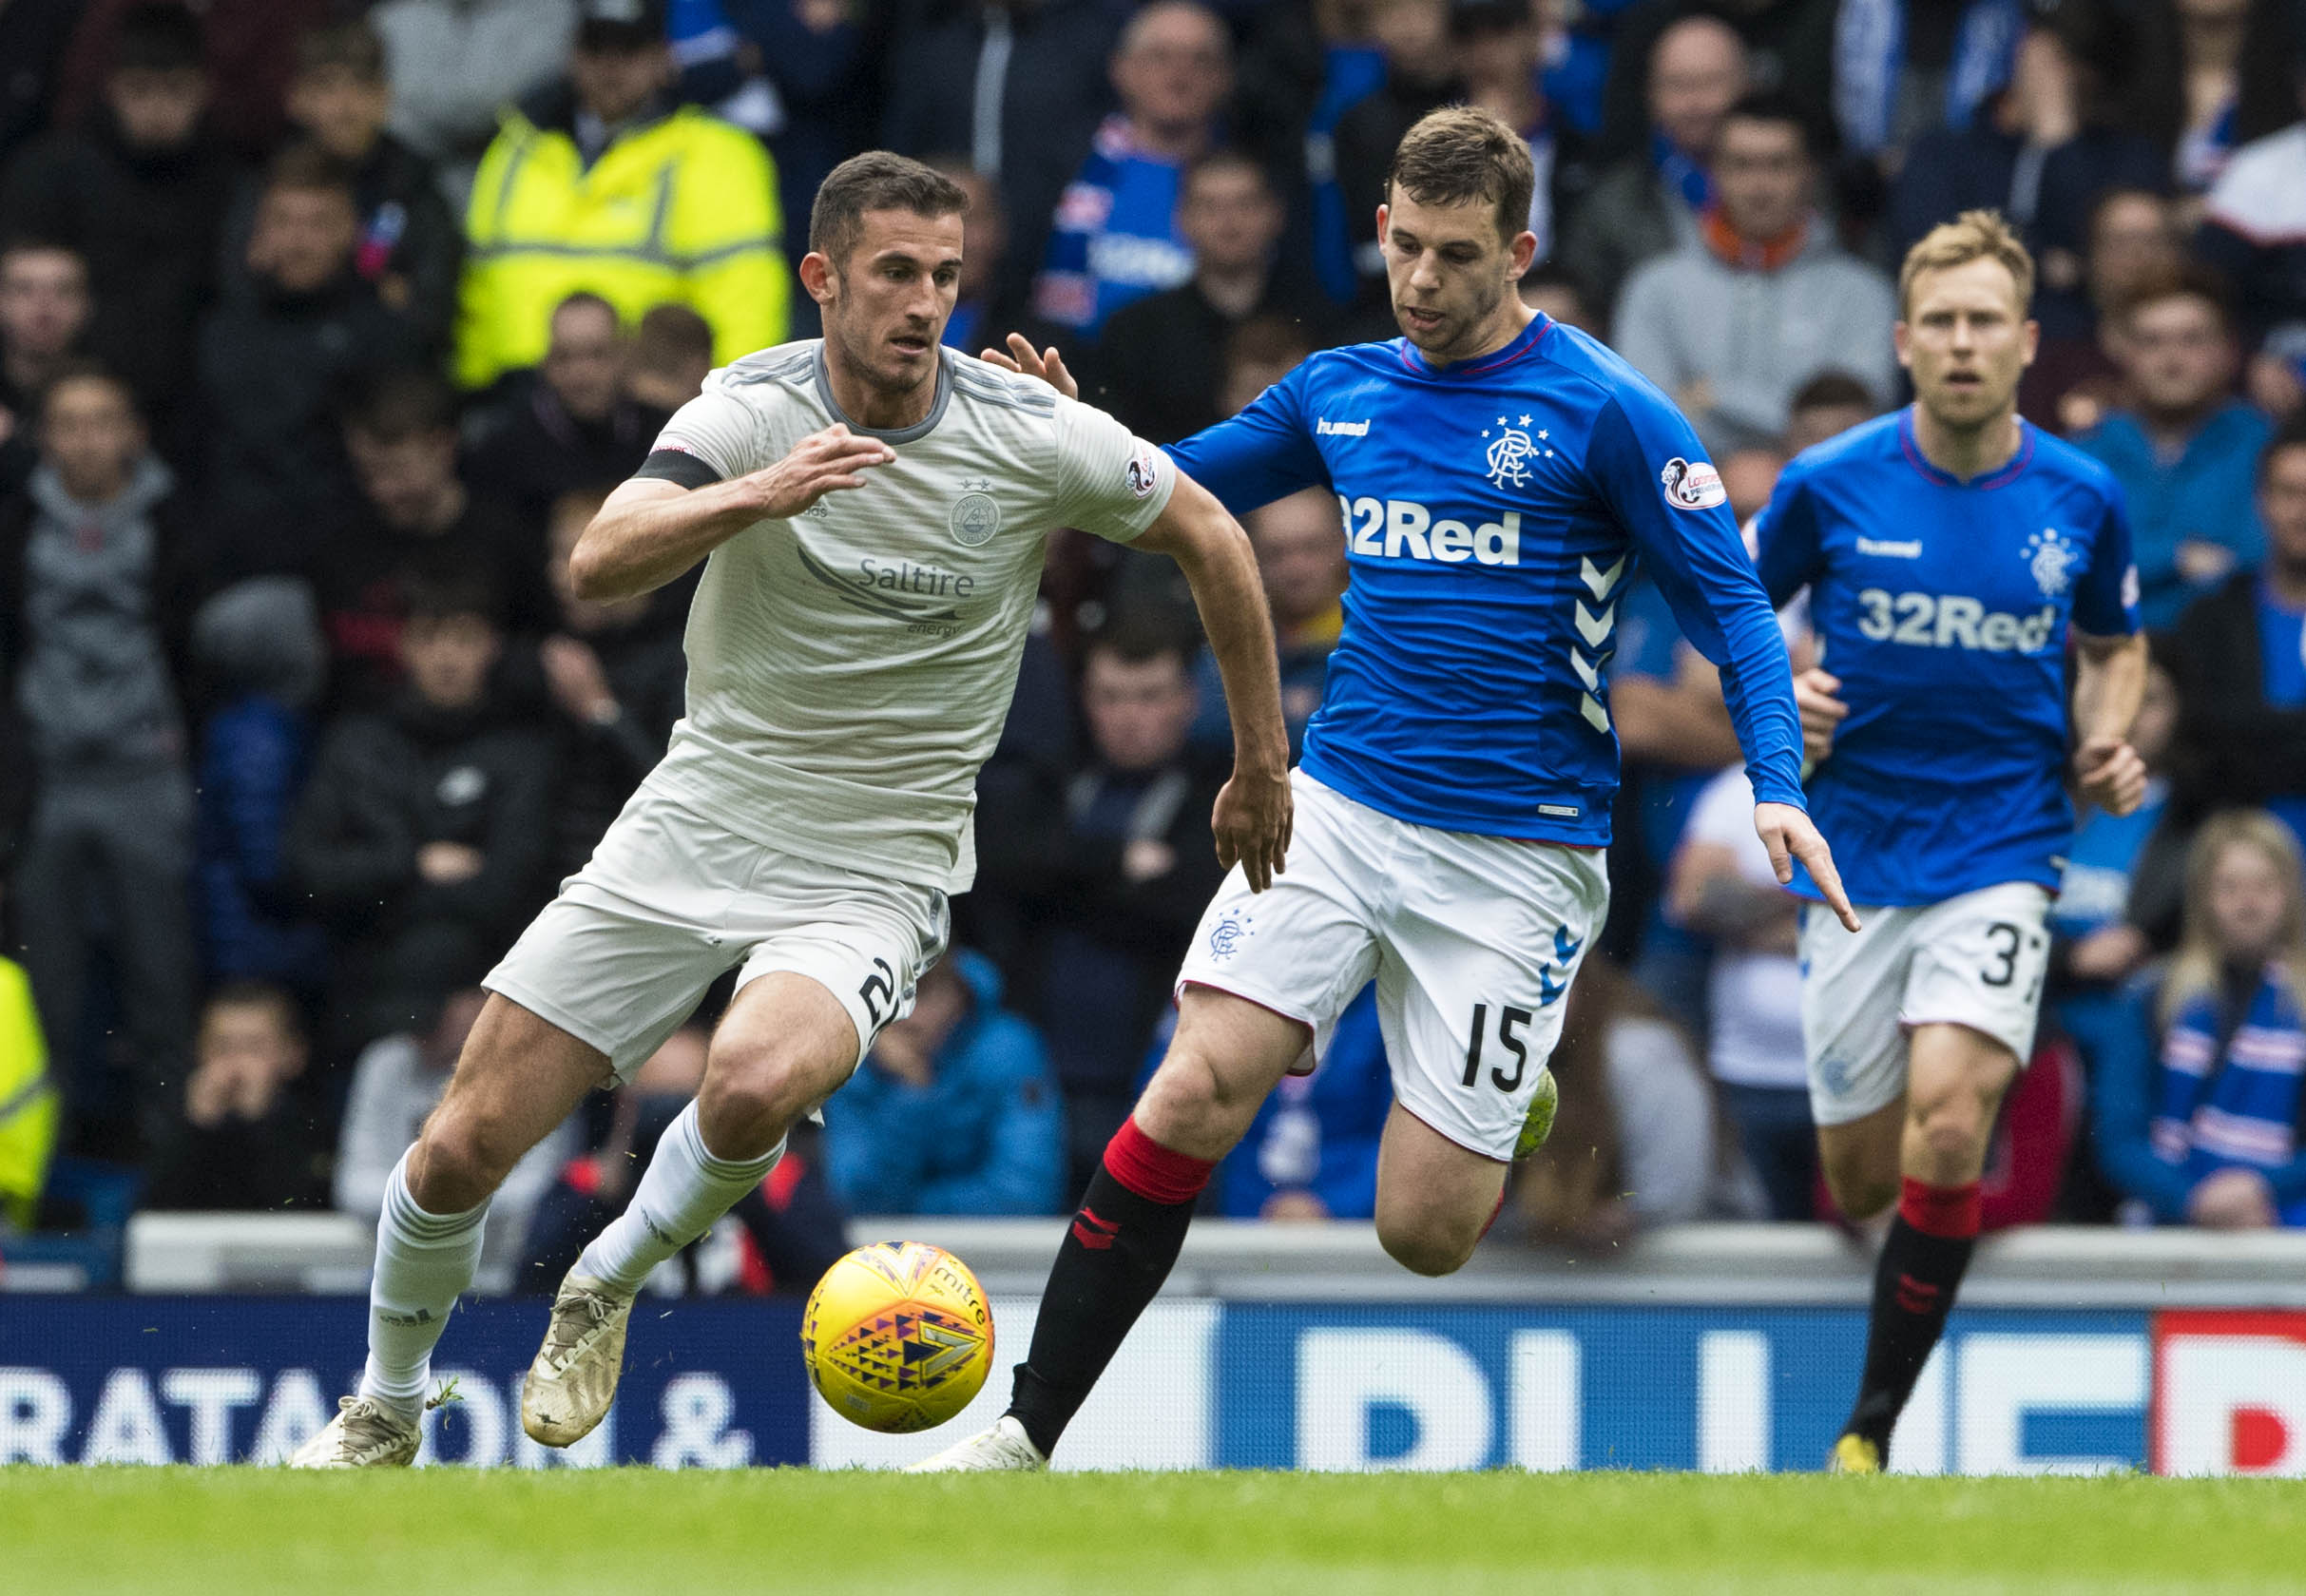 Aberdeen's Dominic Ball (L) in action with Rangers' Jon Flanagan